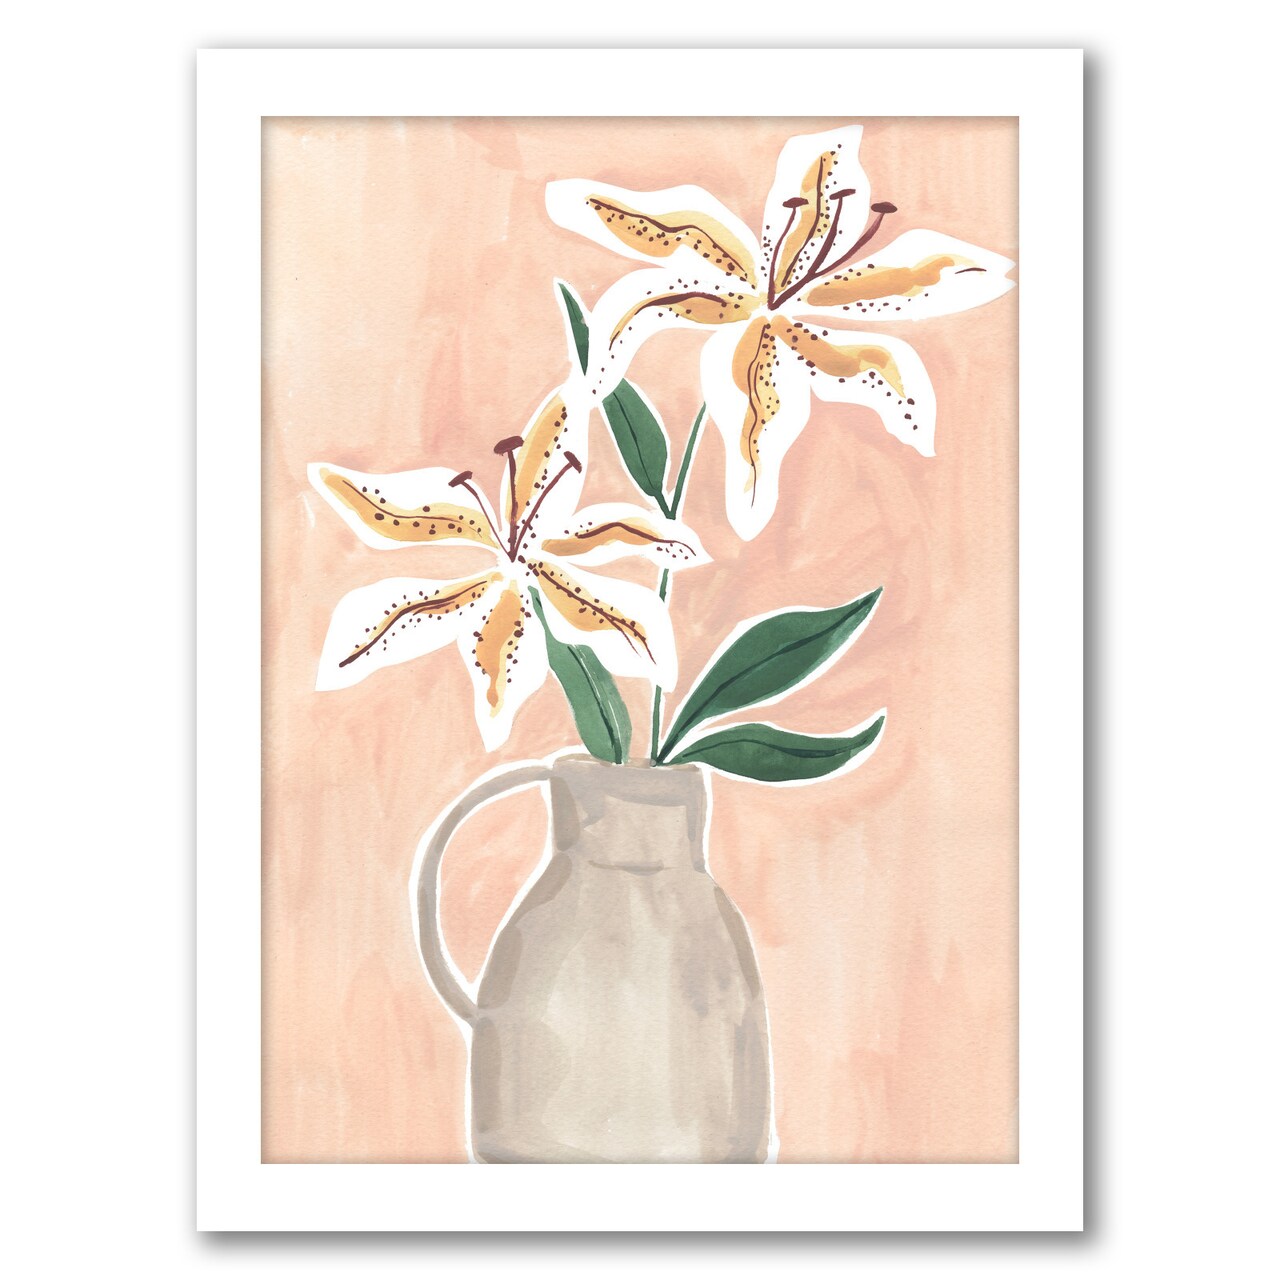 Lilies In A Vase by Sabina Fenn Frame  - Americanflat